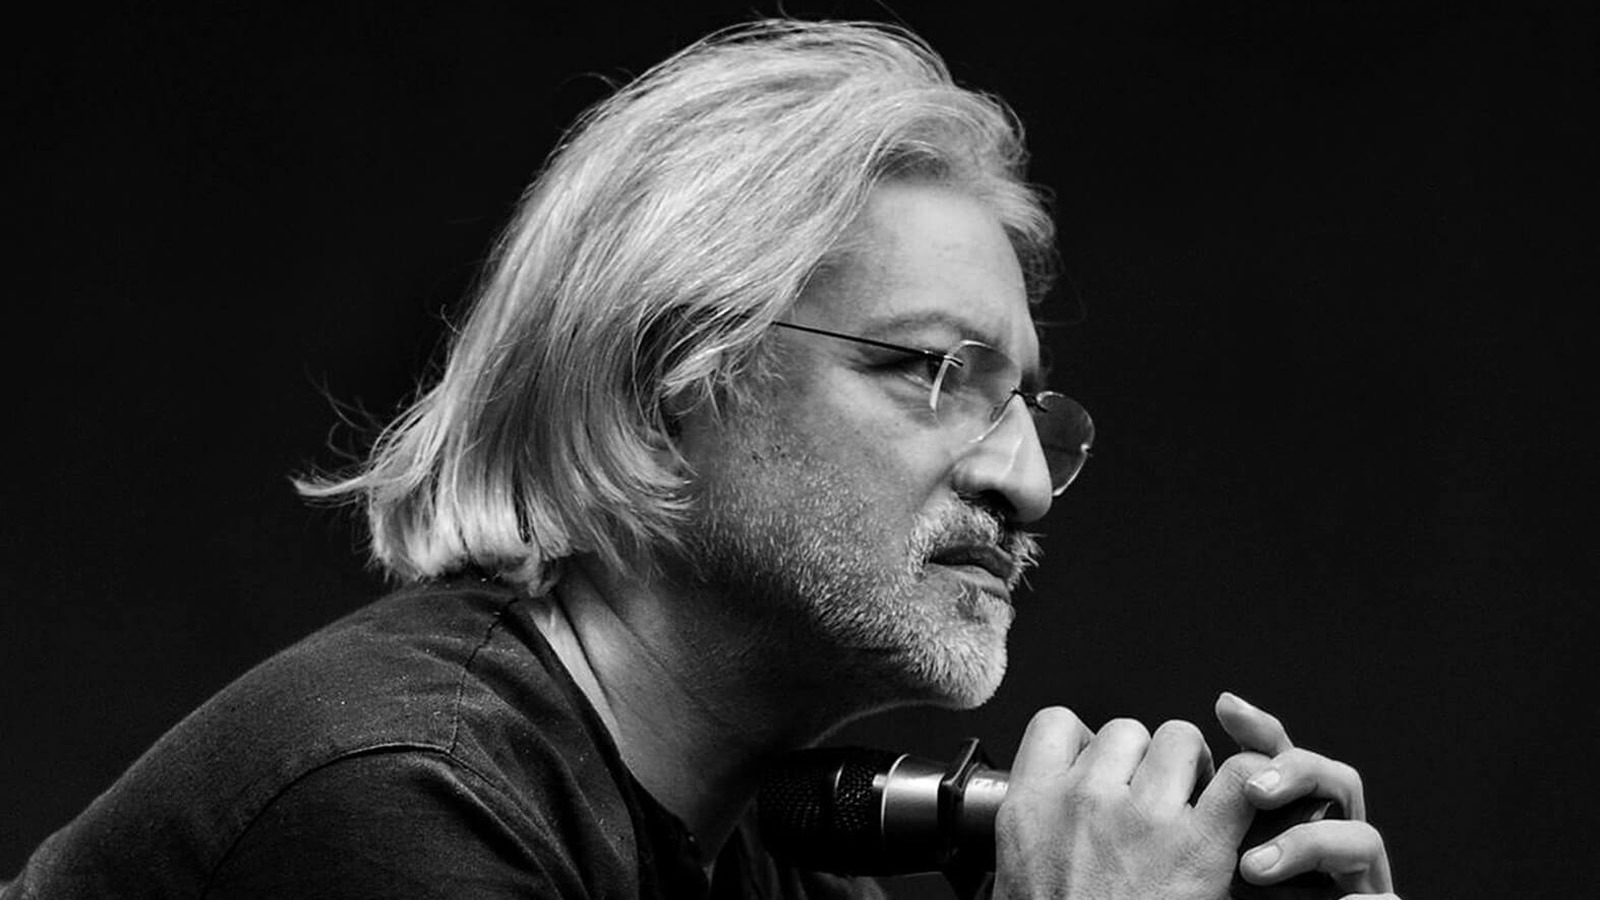 Photograph of Anand Patwardhan, a man with medium length silver hair, wearing glasses and holding a microphone.